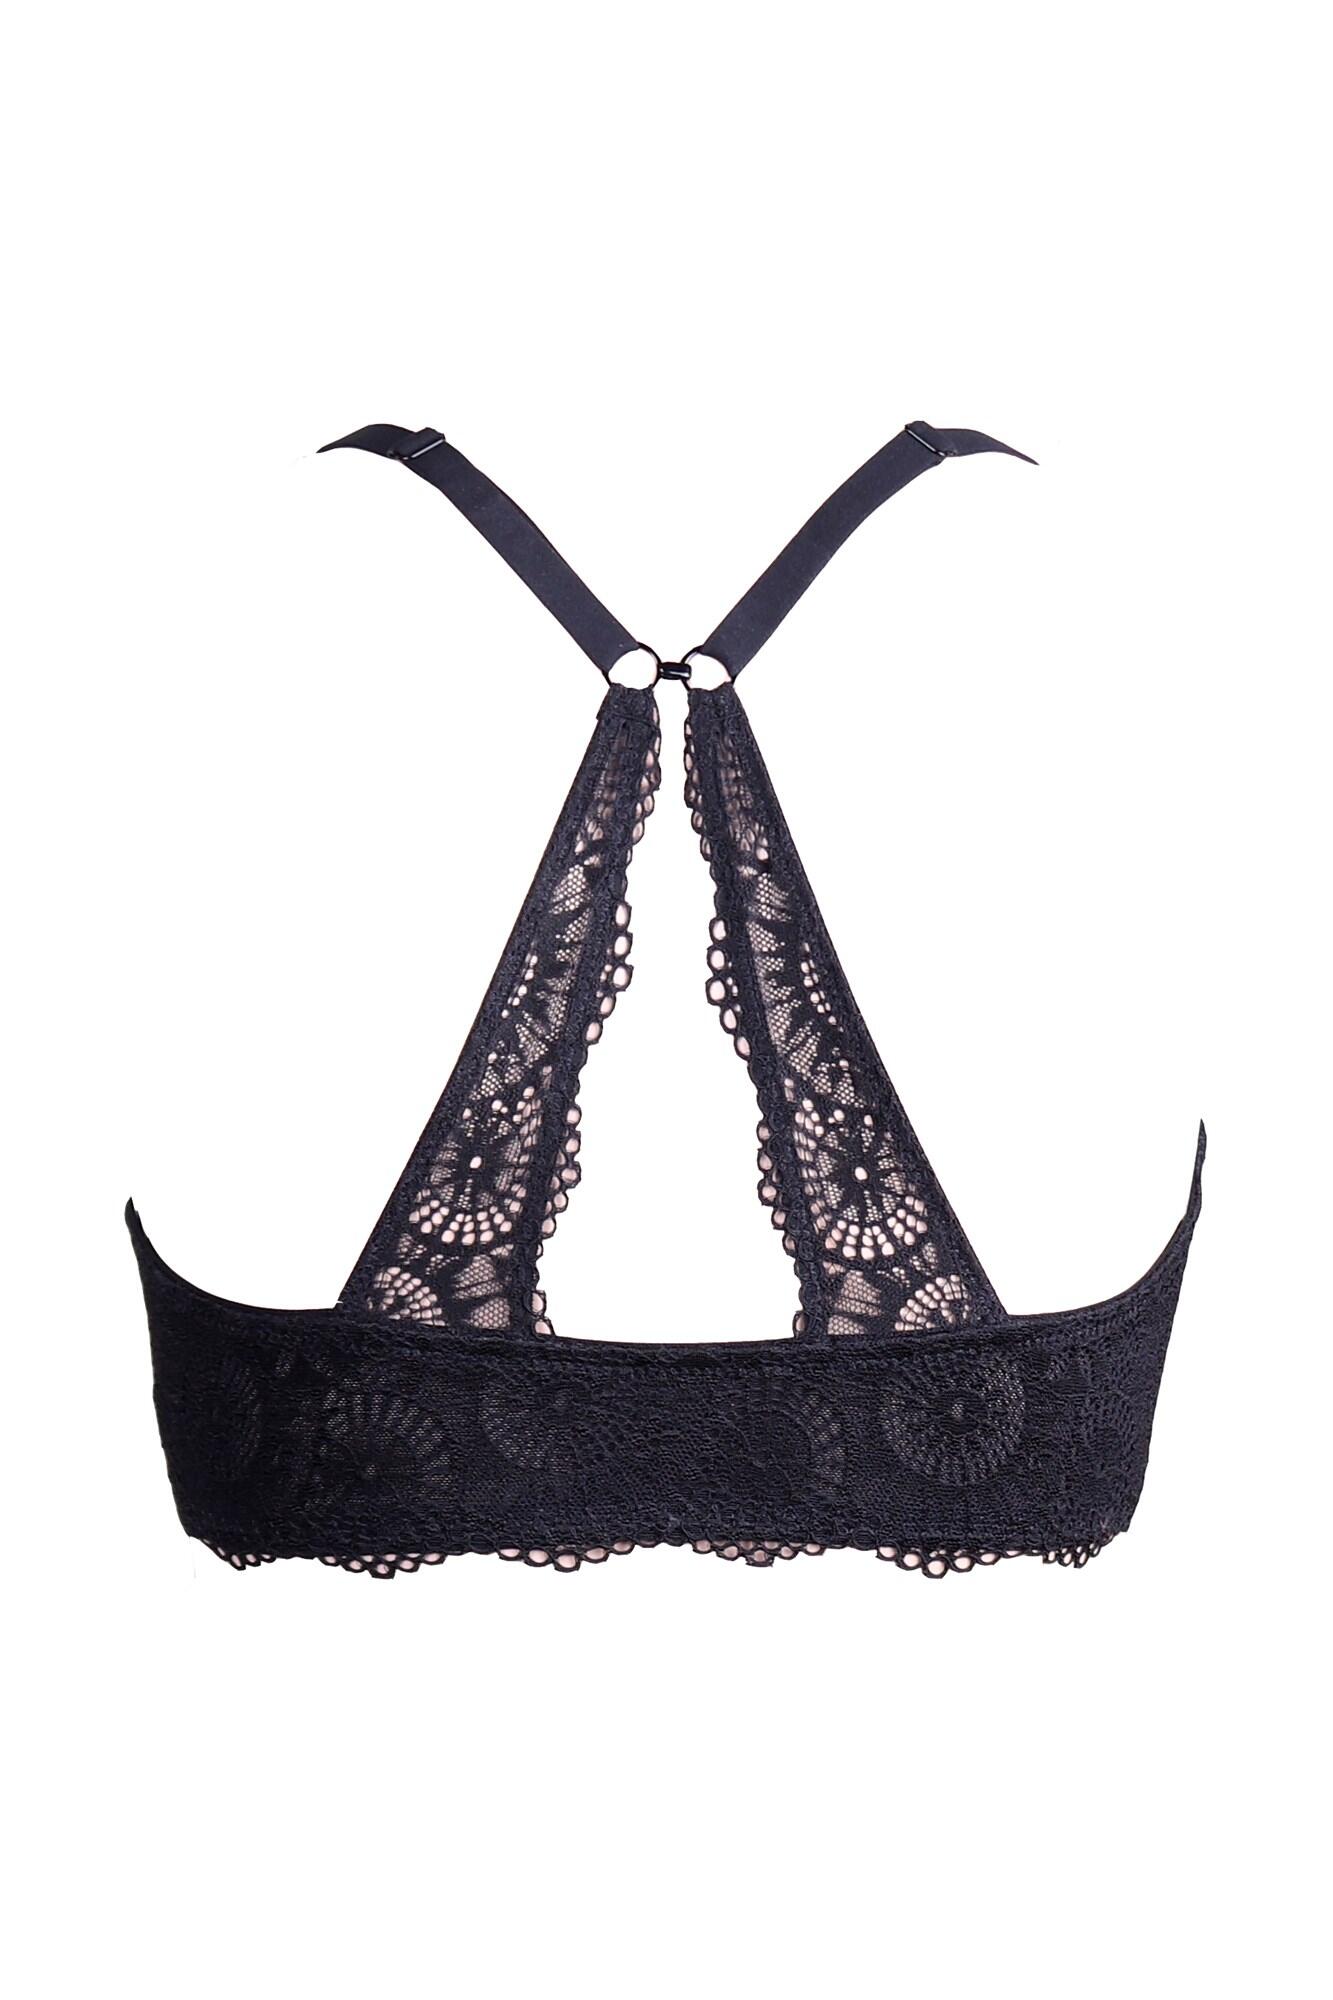 Black Recycled Lace Full Cup Comfort Bra - 32E, £10.00